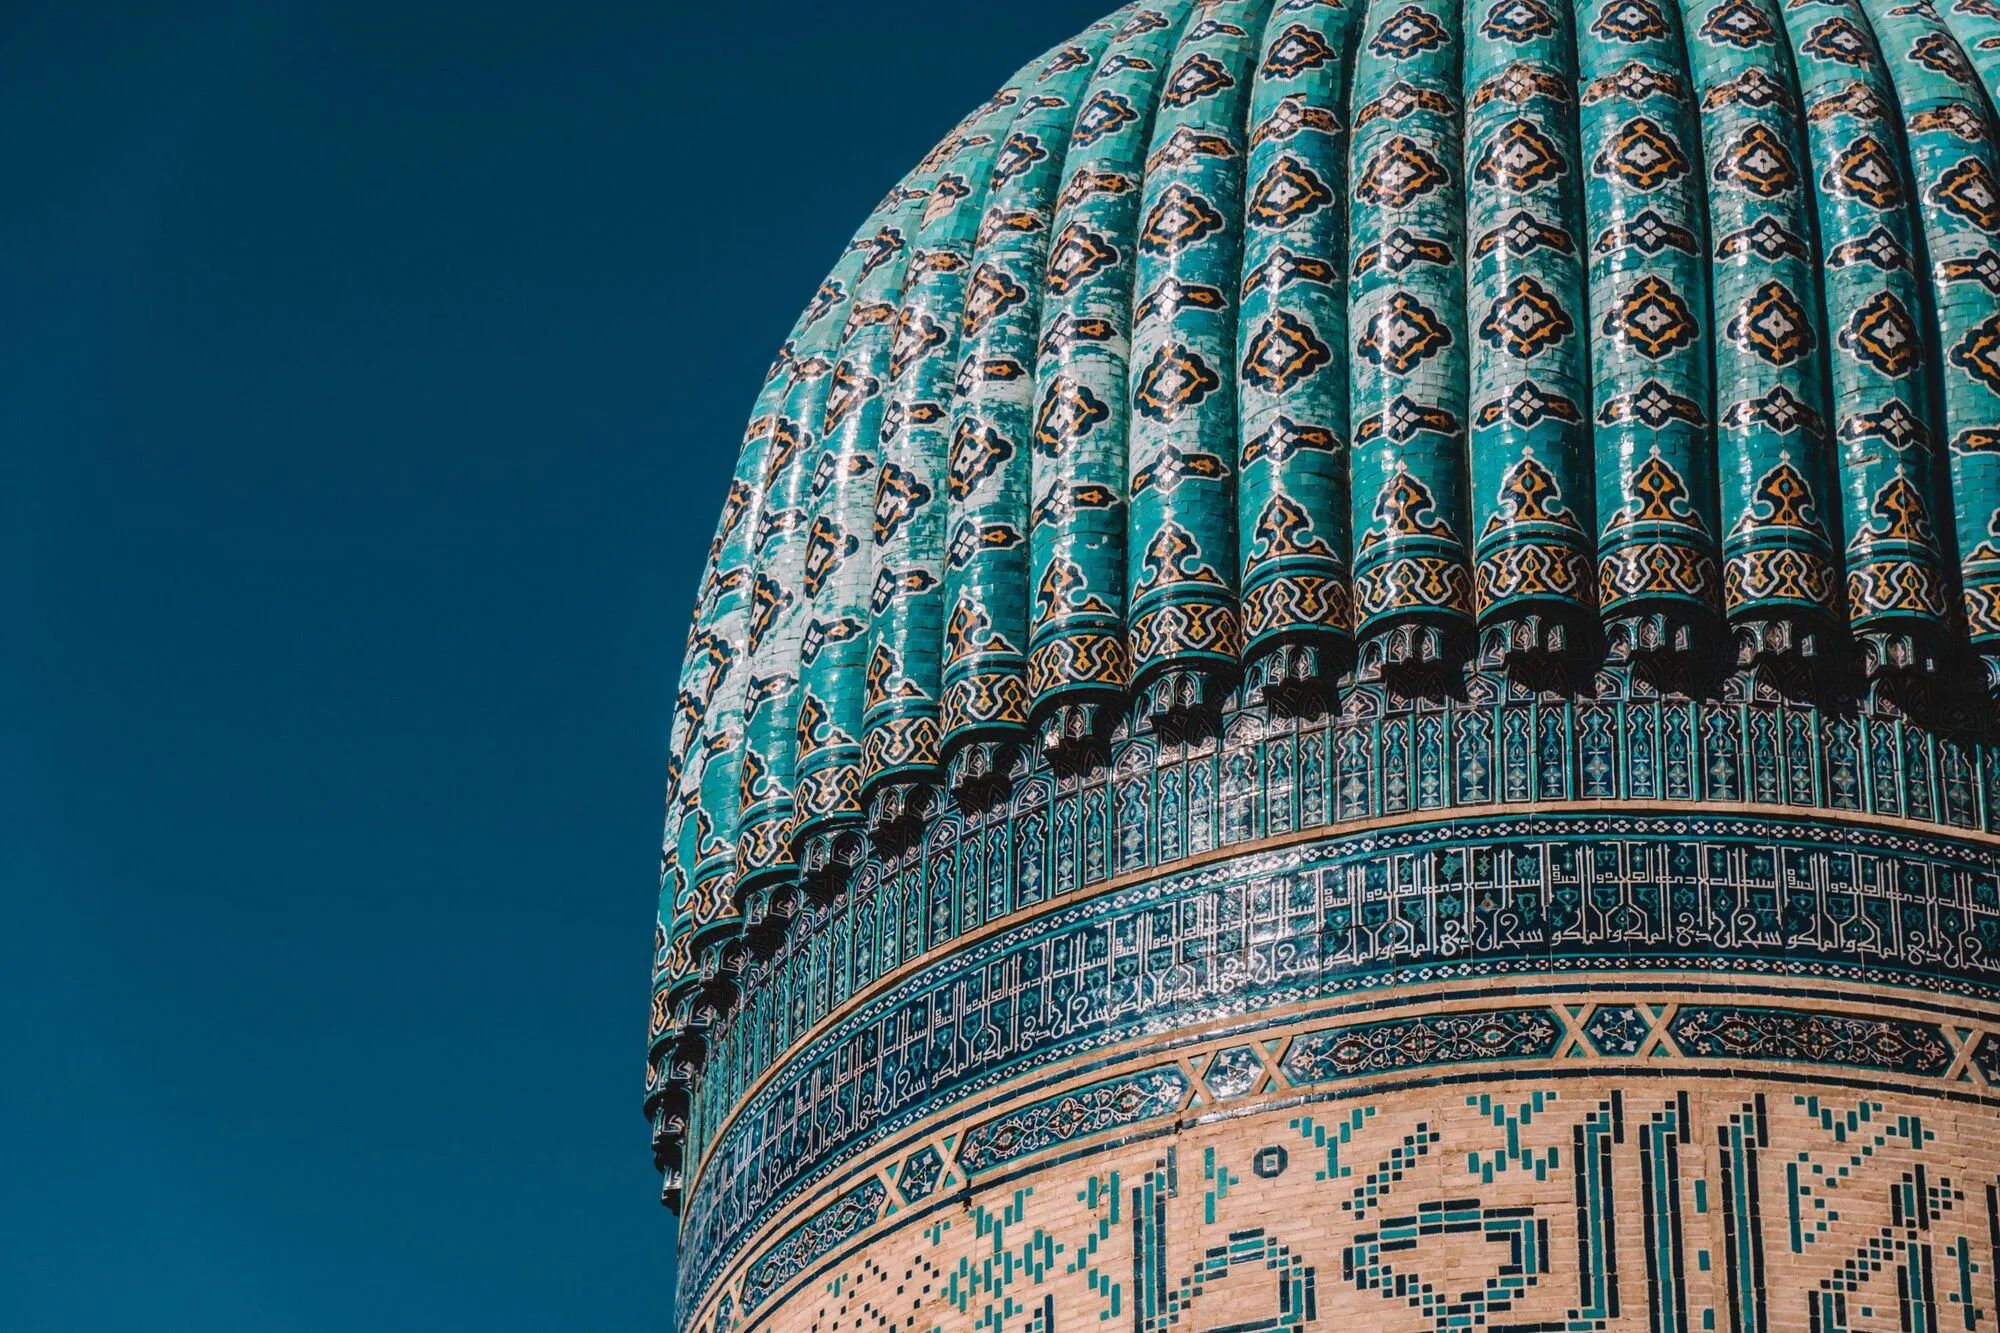 2 Weeks Backpacking Uzbekistan Itinerary - A Complete Travel Guide and Backpacking Route